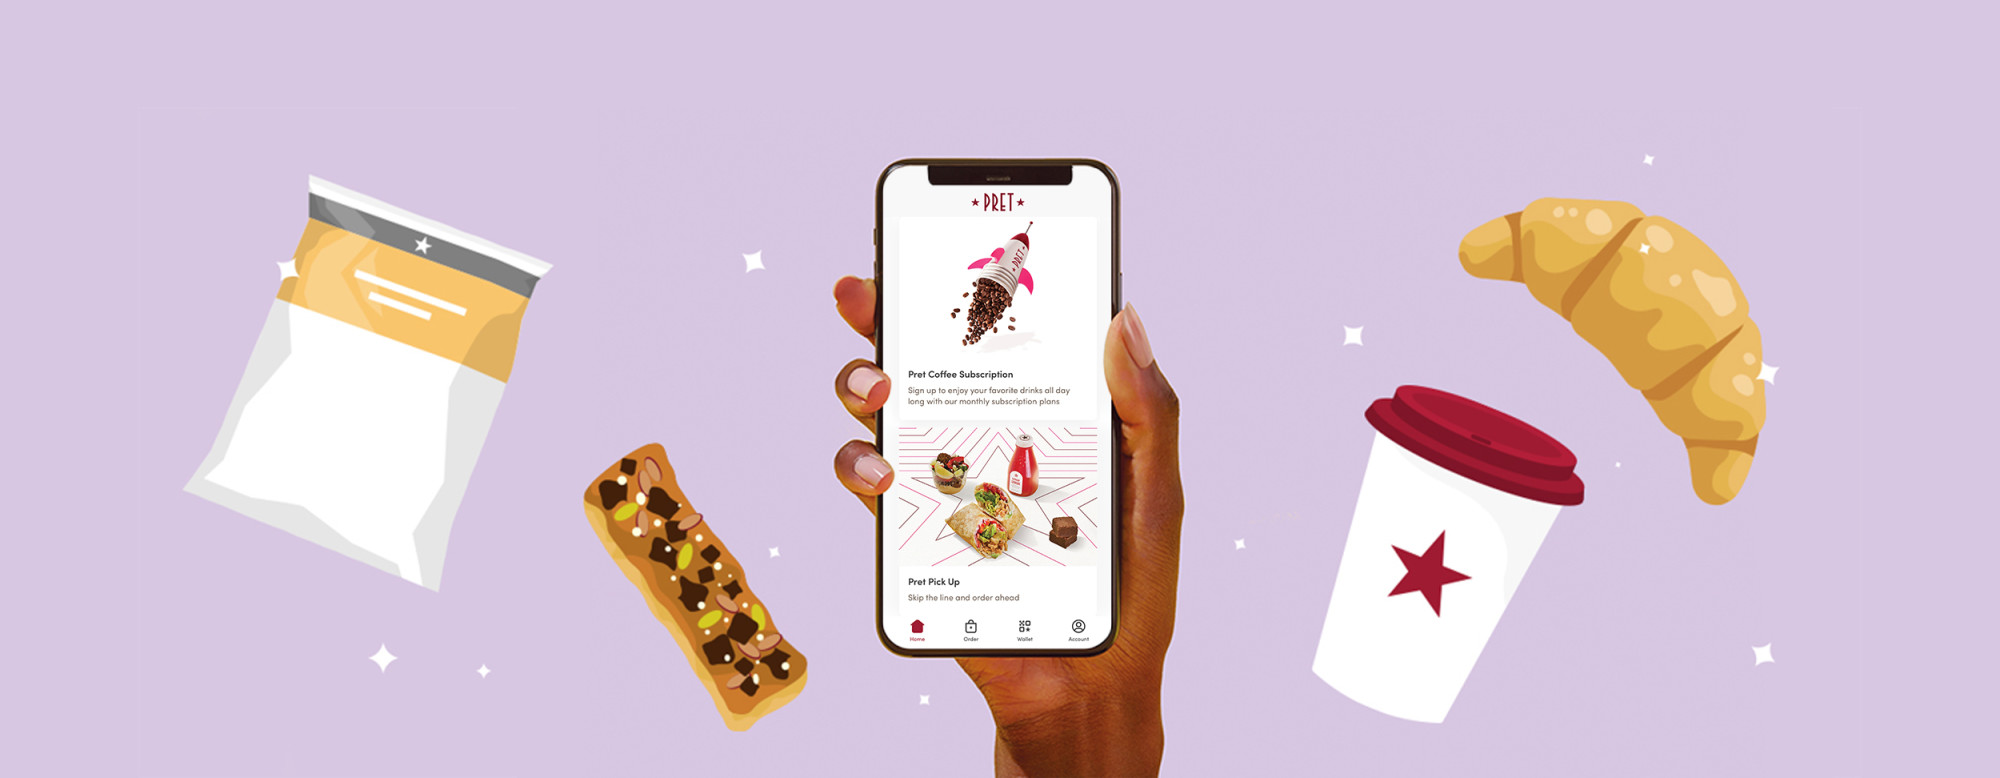 Say hello to the new Pret app